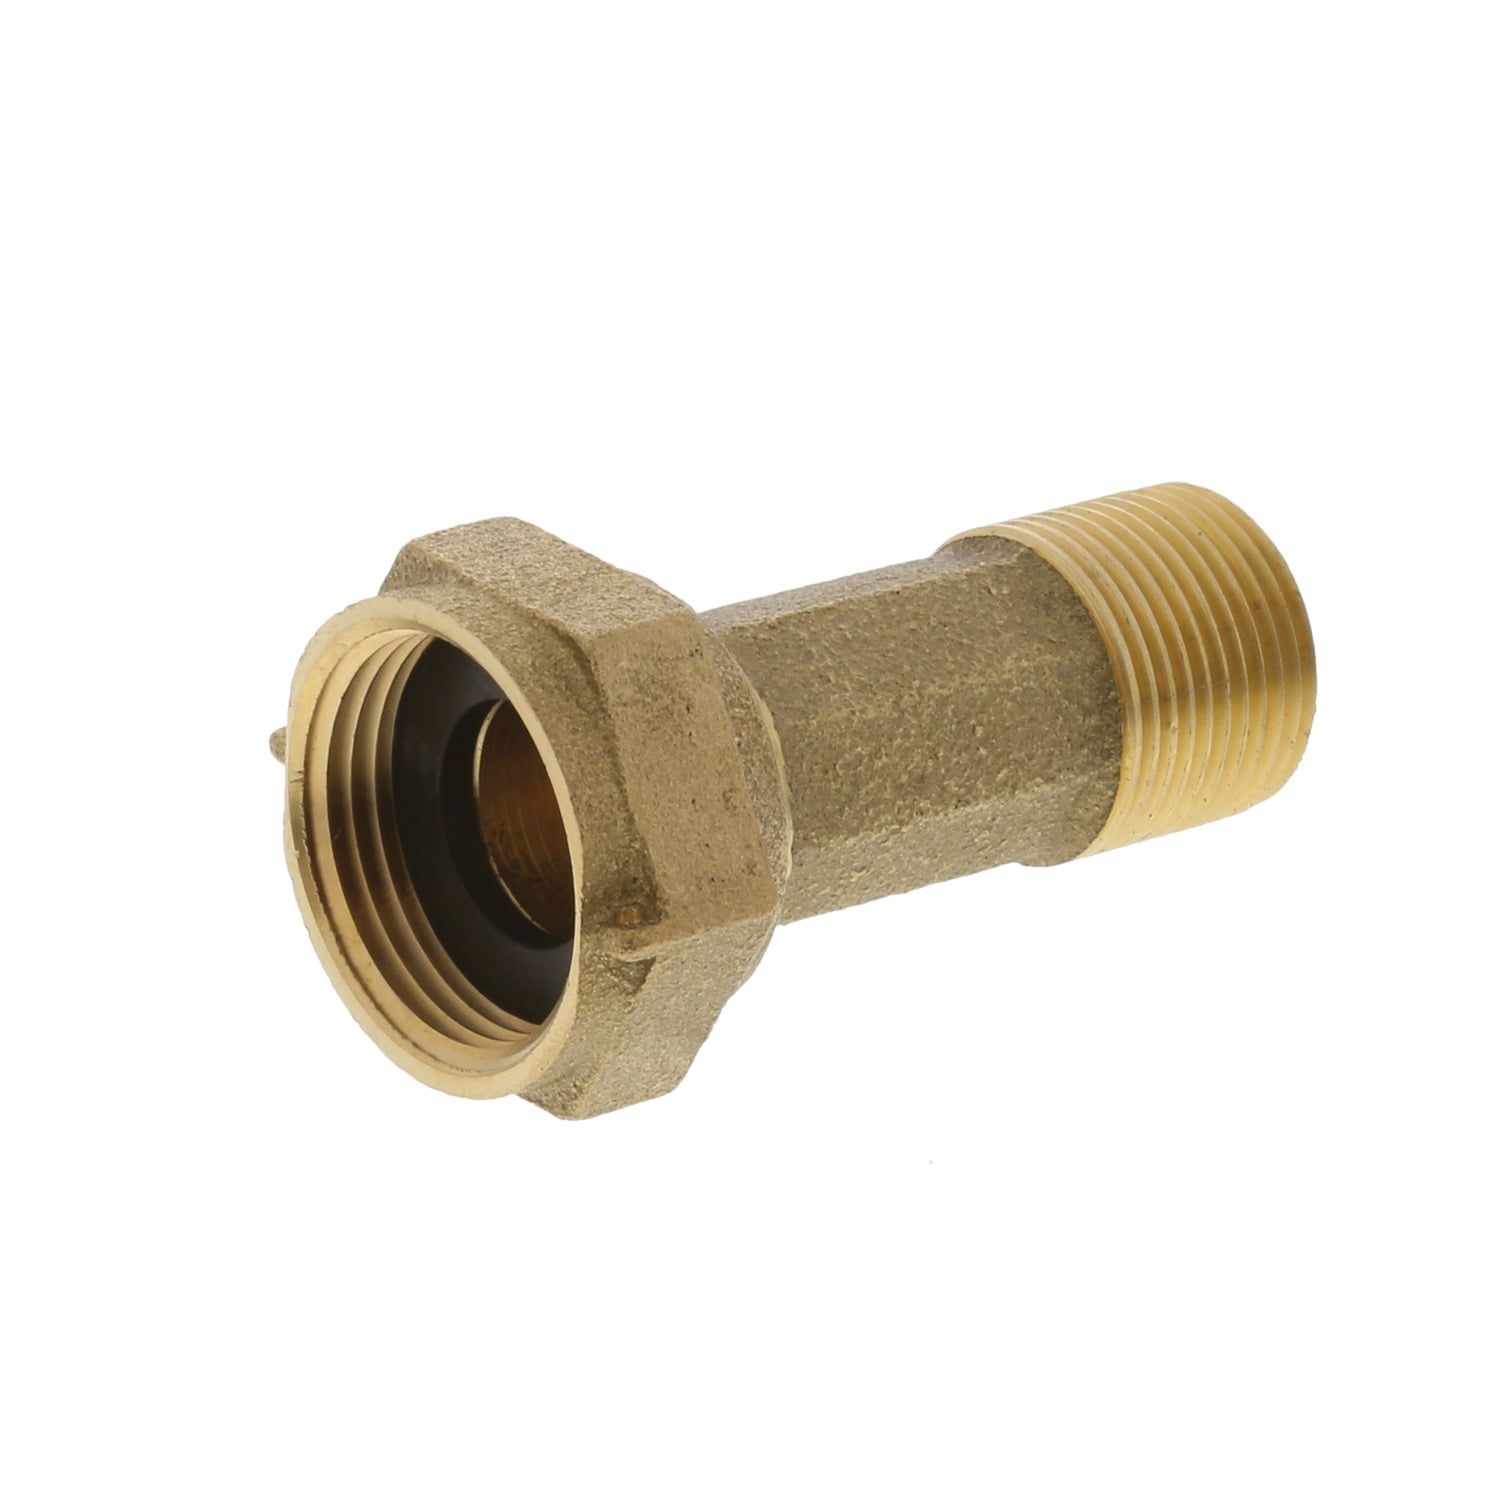 With Bushing for FEM thread meter LEAD-FREE brass 2" Water Meter Coupling 